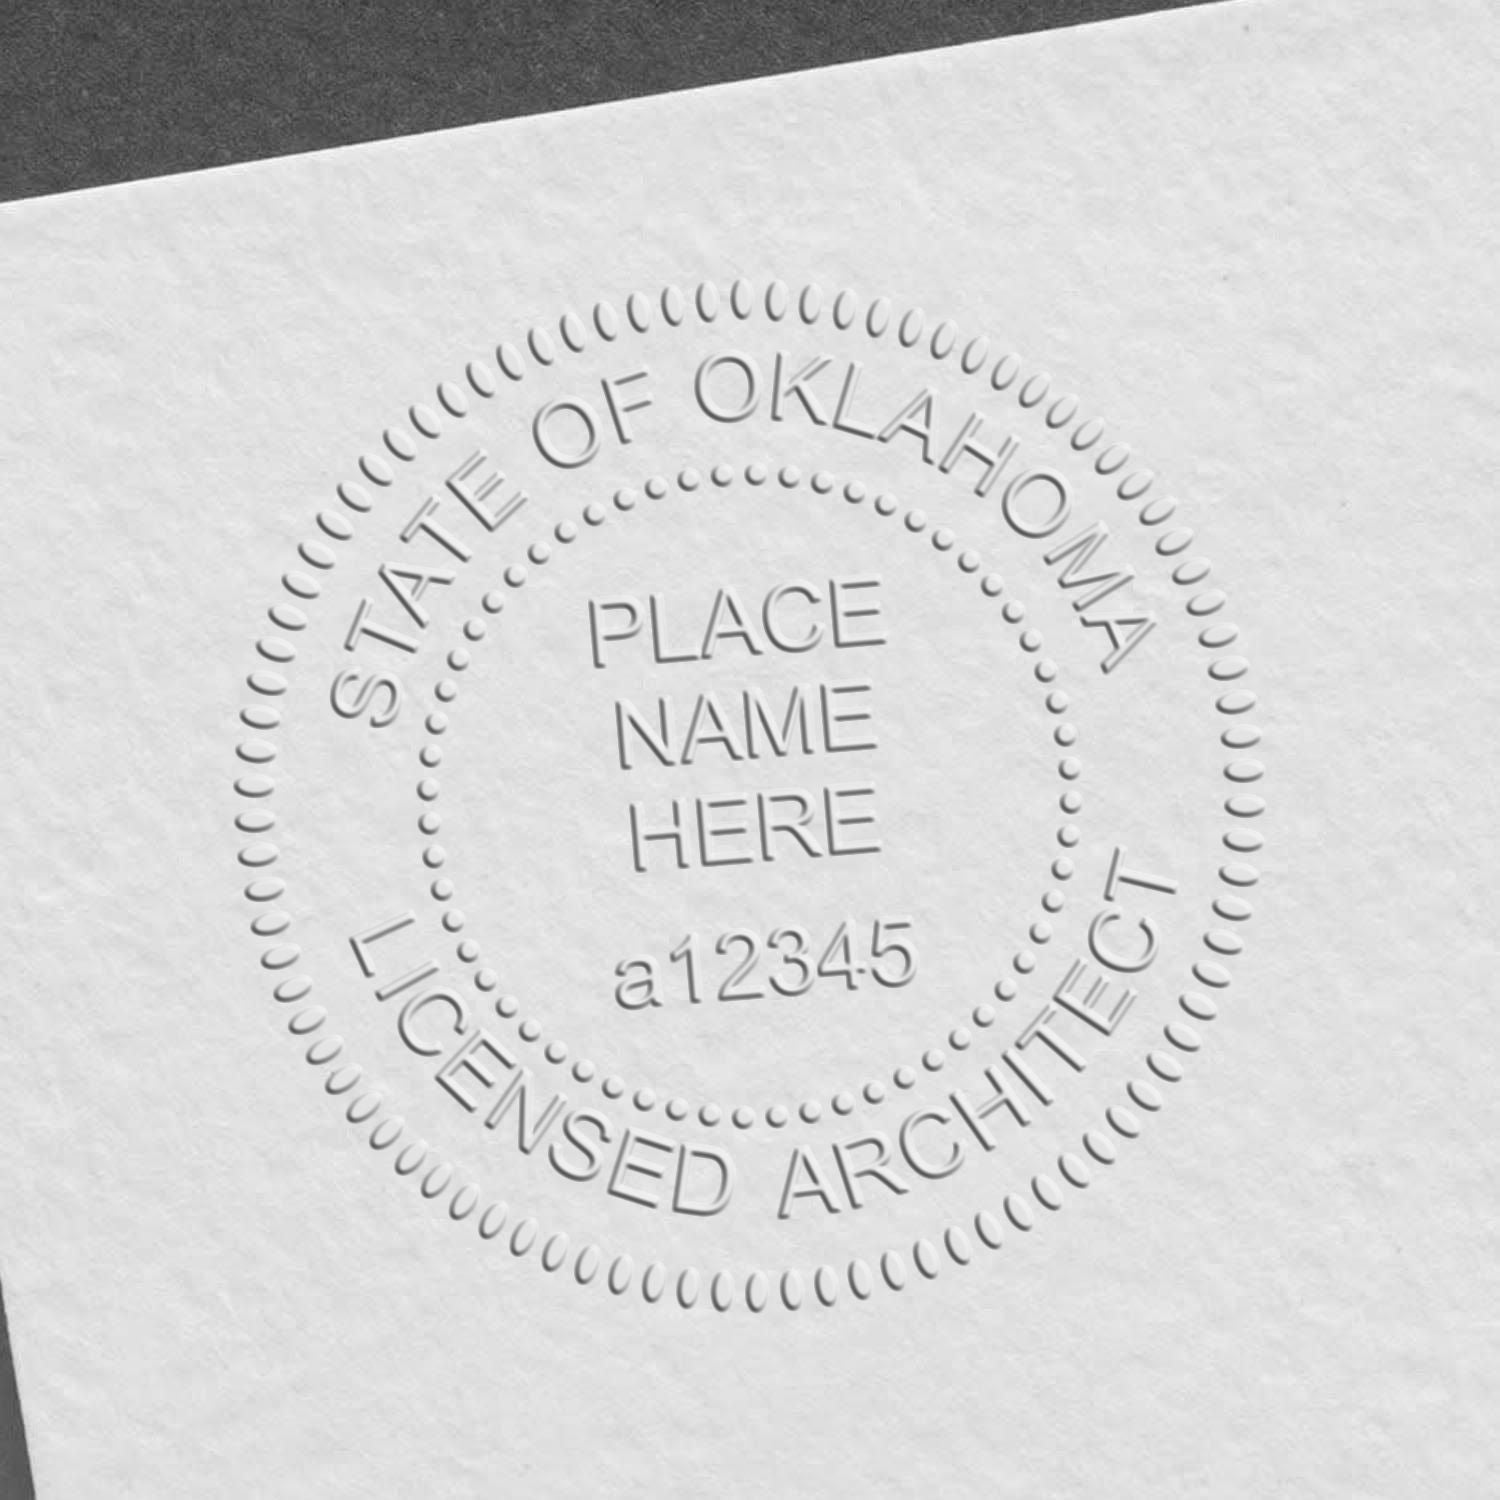 The State of Oklahoma Long Reach Architectural Embossing Seal stamp impression comes to life with a crisp, detailed photo on paper - showcasing true professional quality.